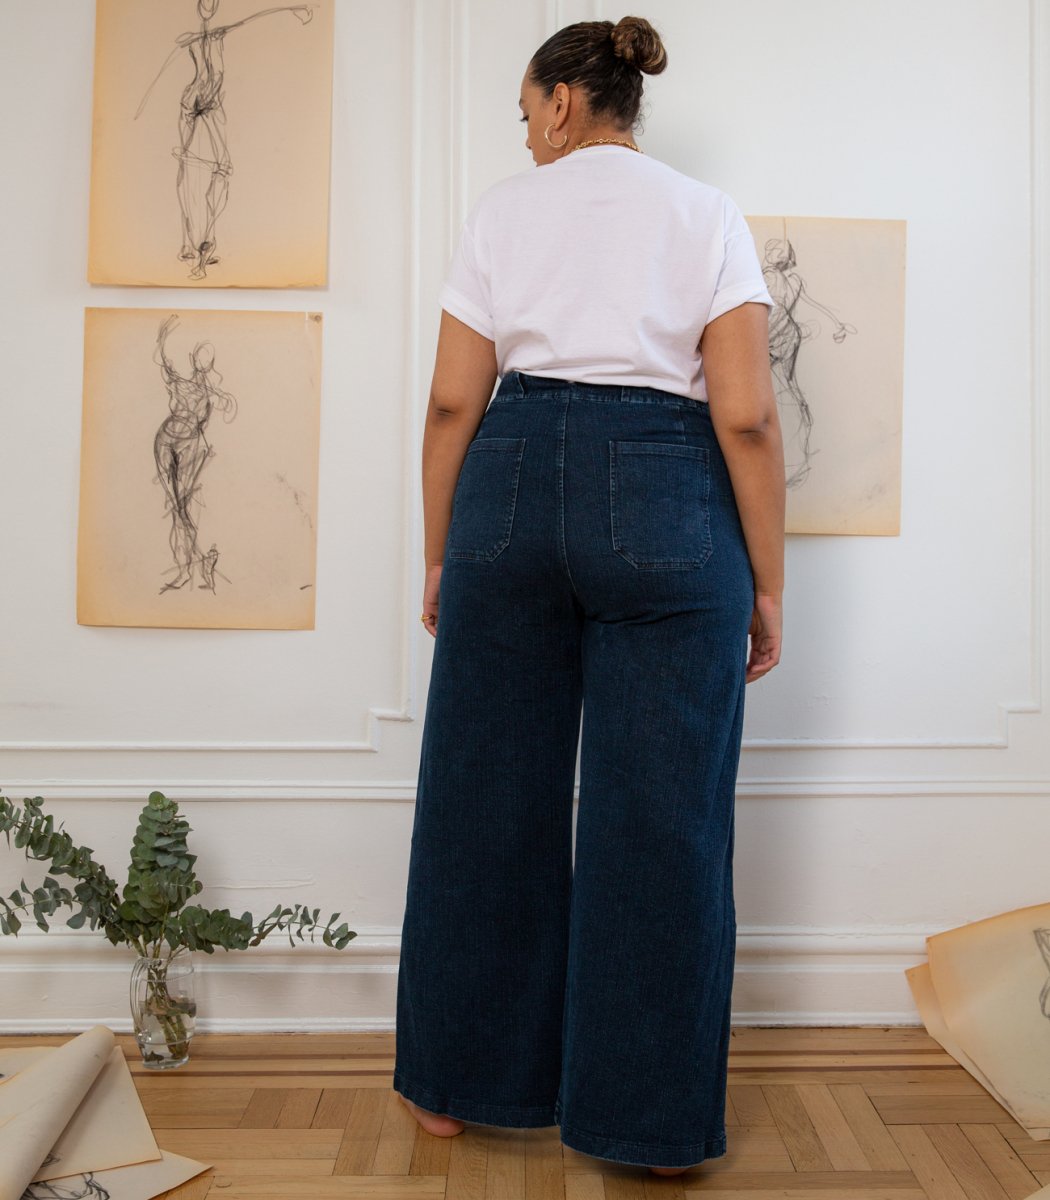 A model shows the backside of long wide legged denim pants with large front pockets. The Long Sabrina Jeans in Dark Indigo are designed by Loup and made in New York City, USA.